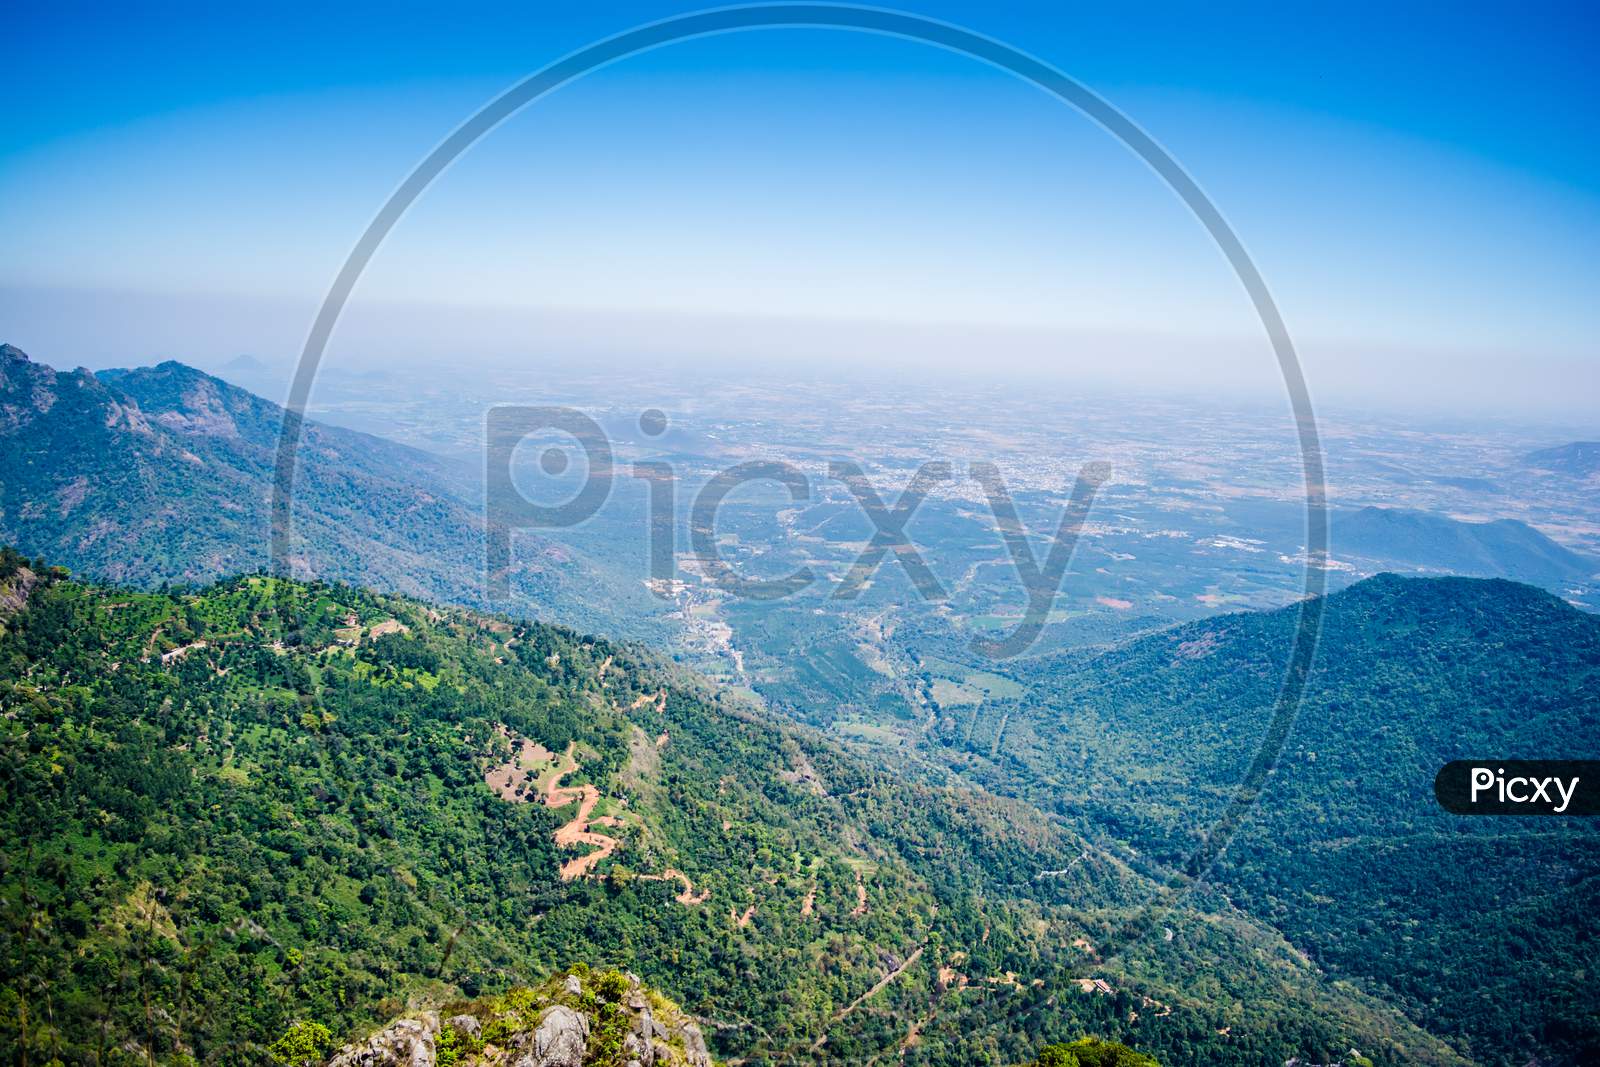 Ooty city aerial view, Ooty (Udhagamandalam) is a resort town in the Western Ghats mountains, in India's Tamil Nadu state.